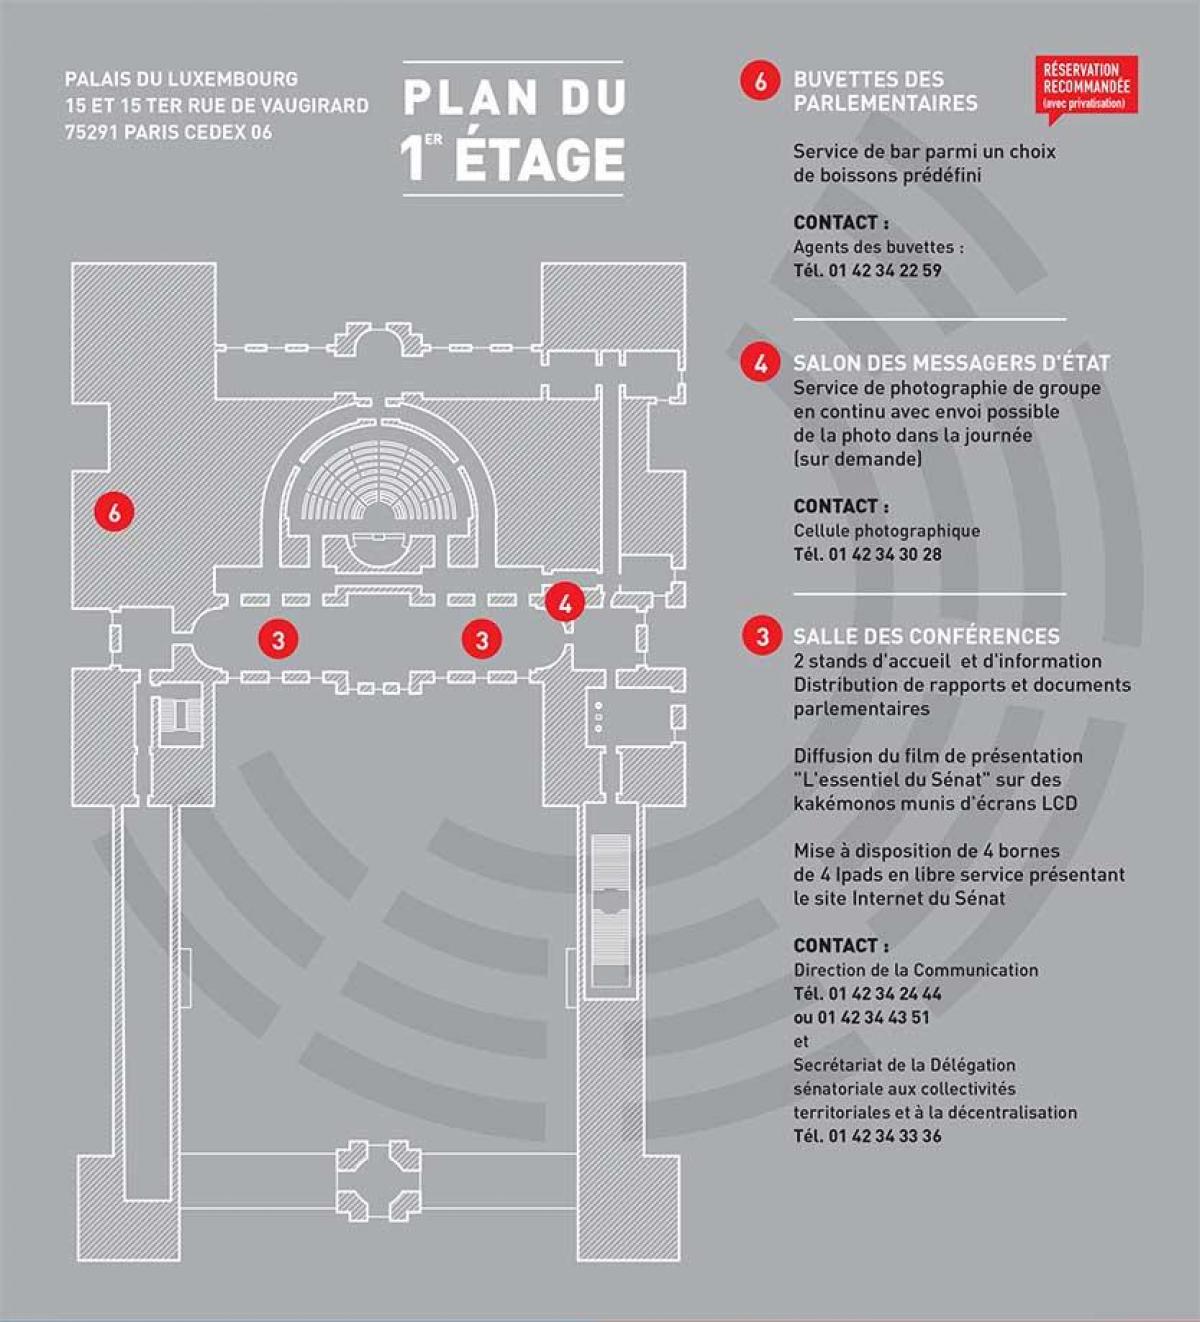 Map of The Luxembourg Palace - Floor 1